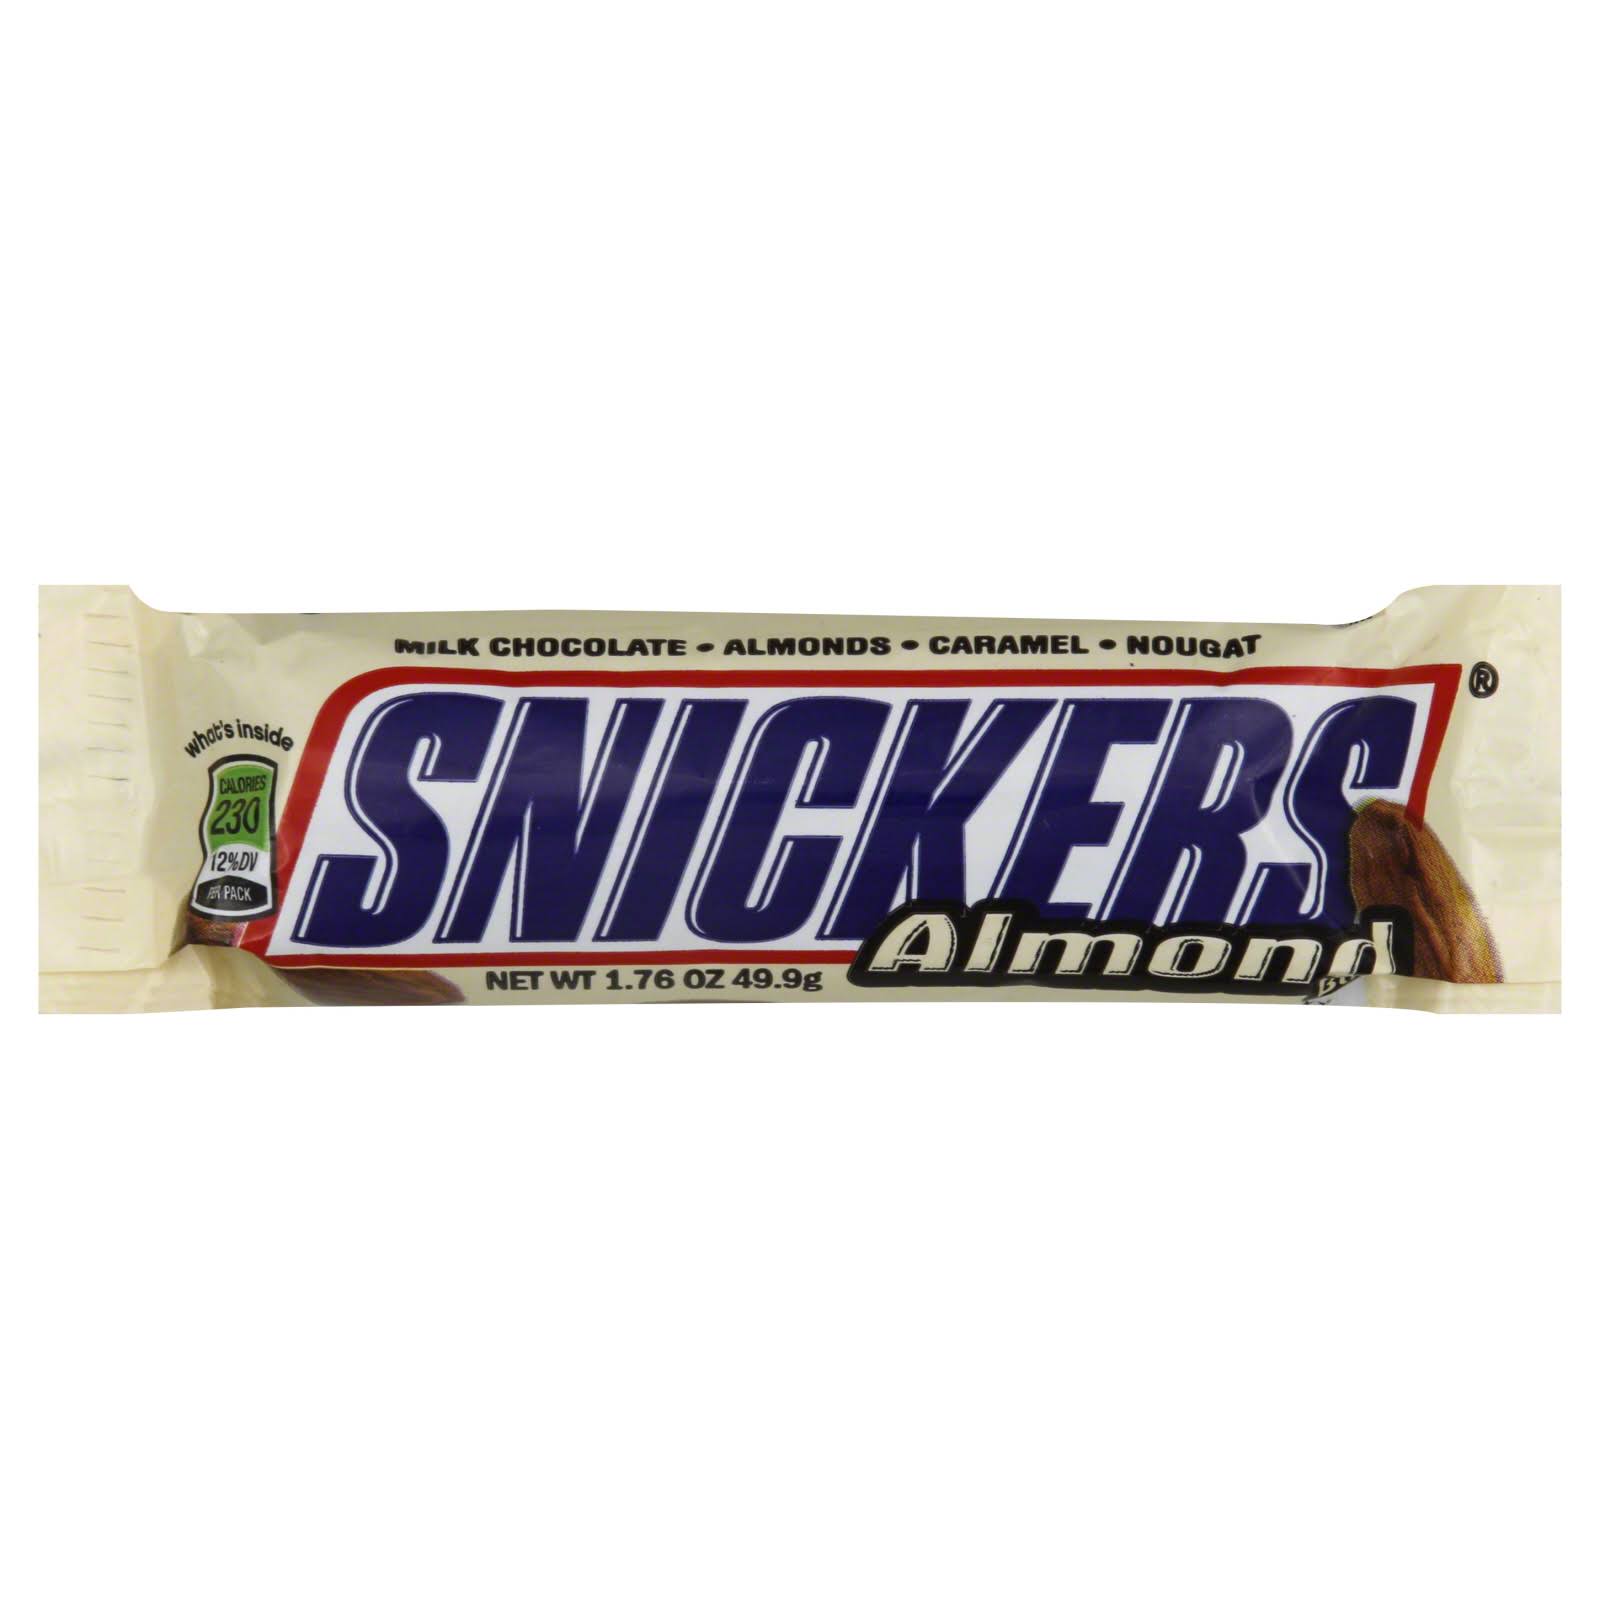 Snickers Almond Chocolate Bar - 49.9g